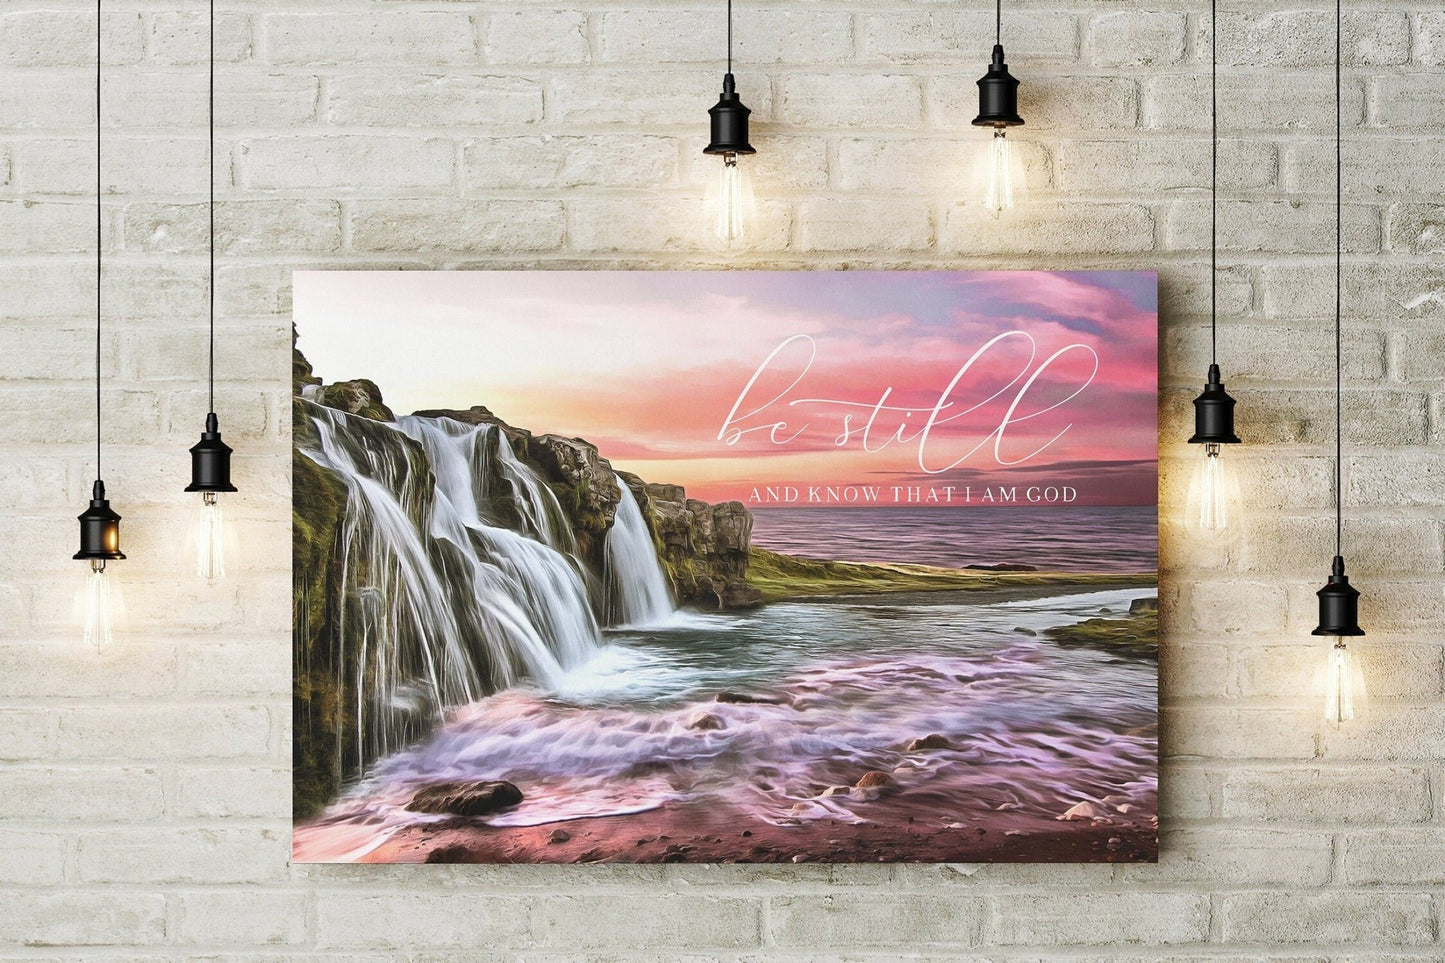 Be Still And Know That I Am God | Waterfall Scripture Wall Art | Psalm 46:10 | Scripture Christian Canvas | Waterfall Bible Verse Wall Art - Forever Written